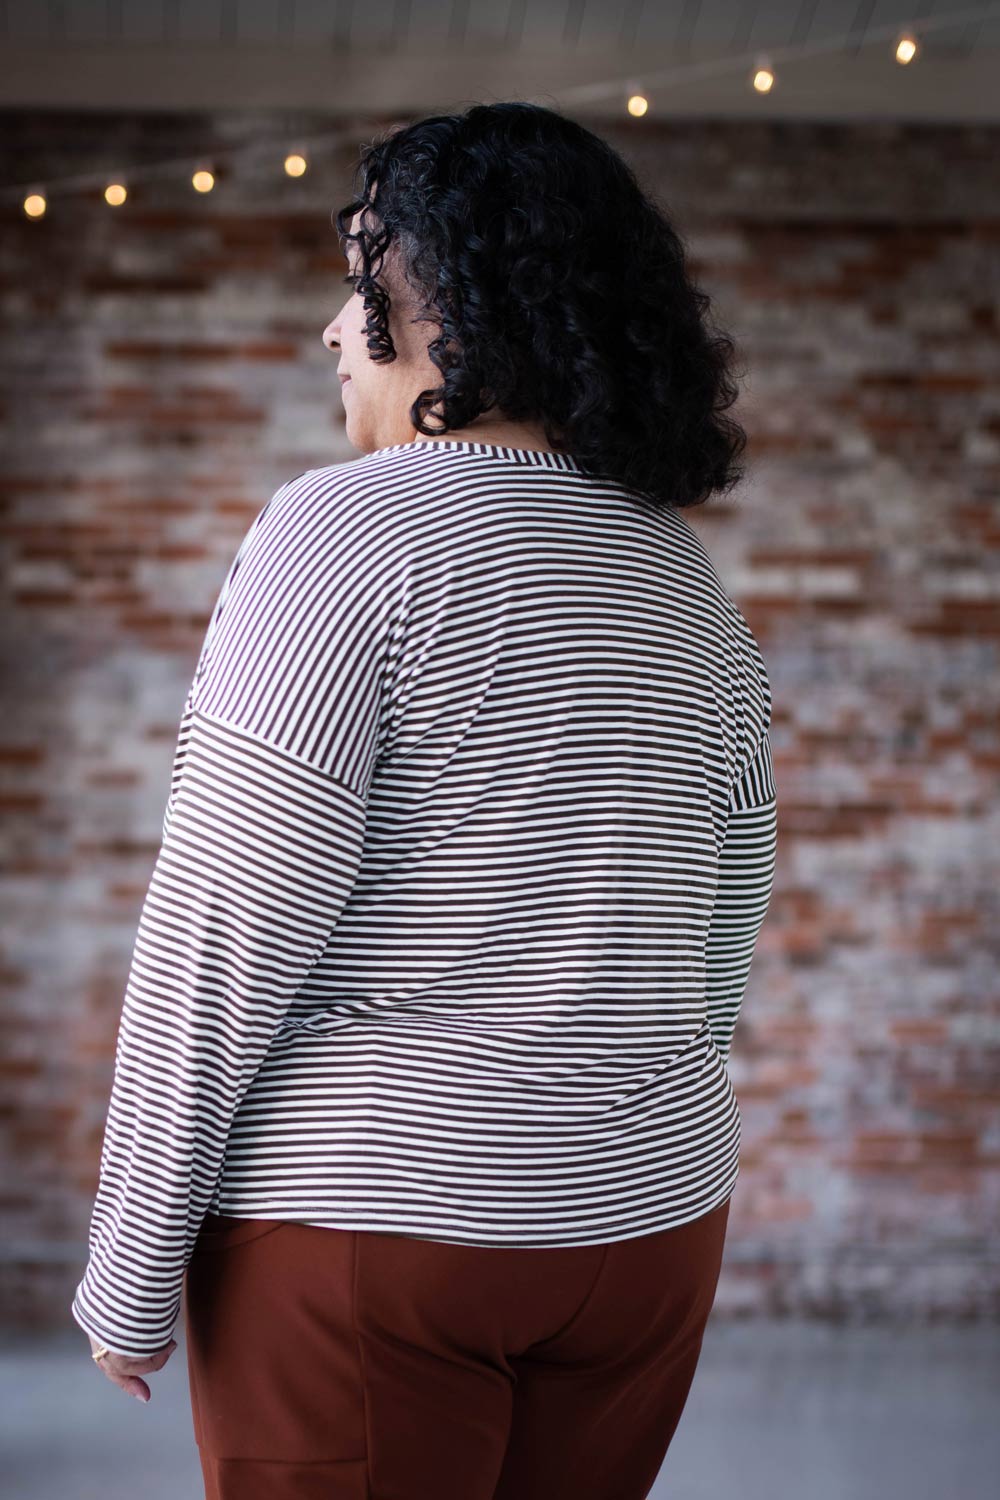 Sudi-Laura models a striped Bedrock Tee, showing the back.